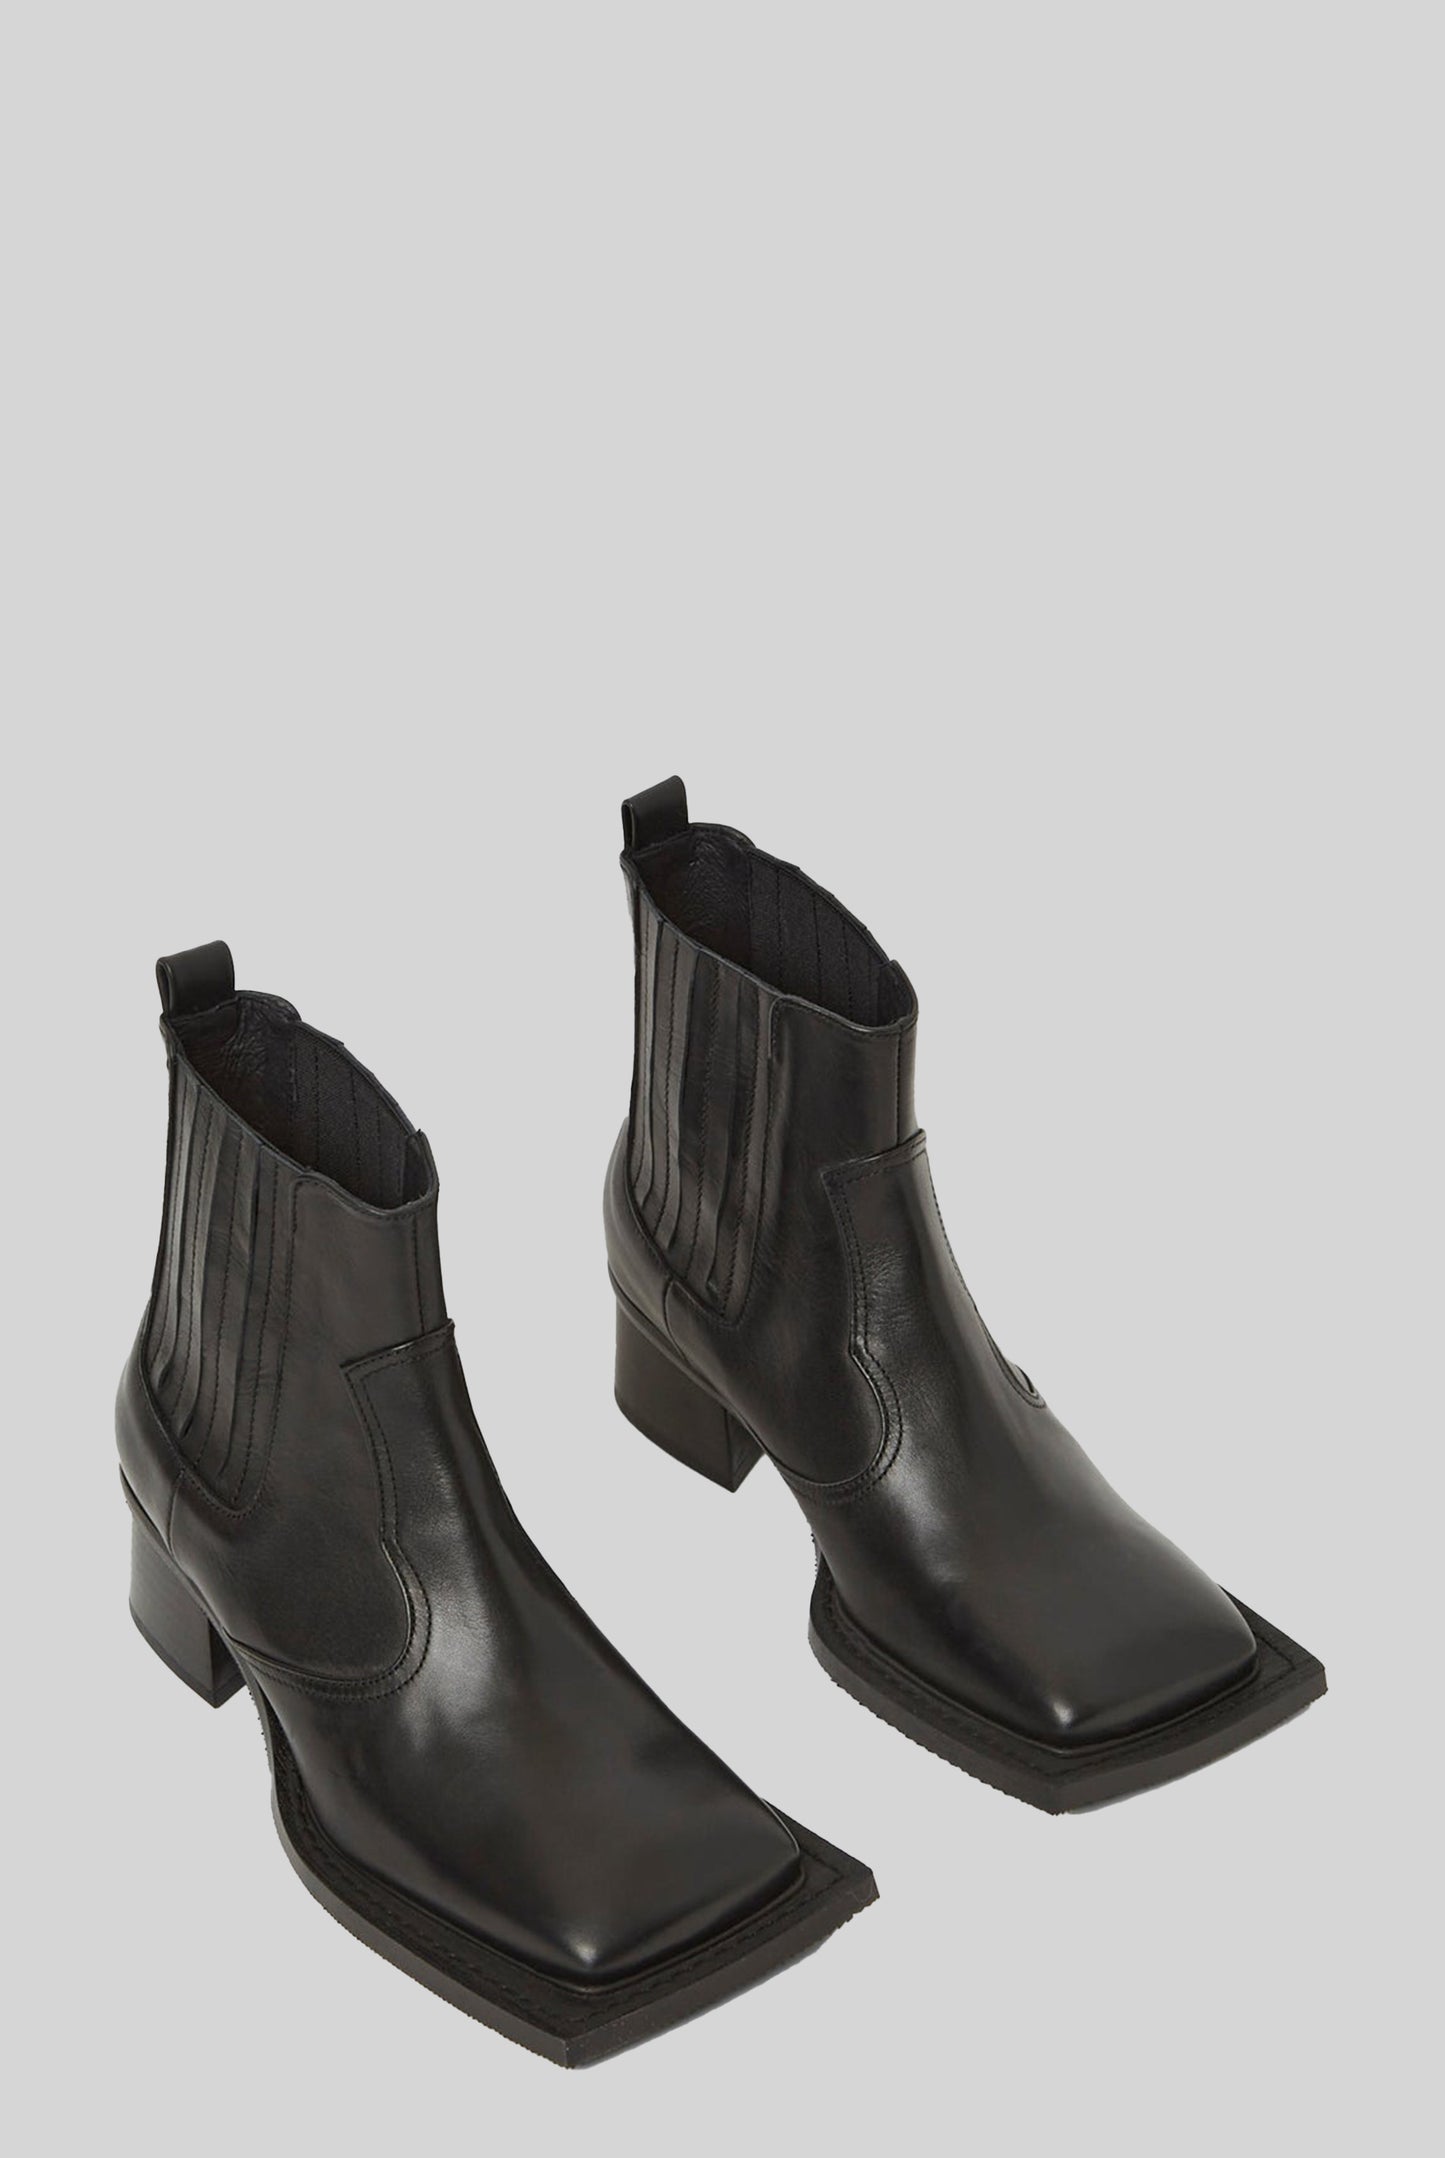 Howler Ankle Boots in Black Leather